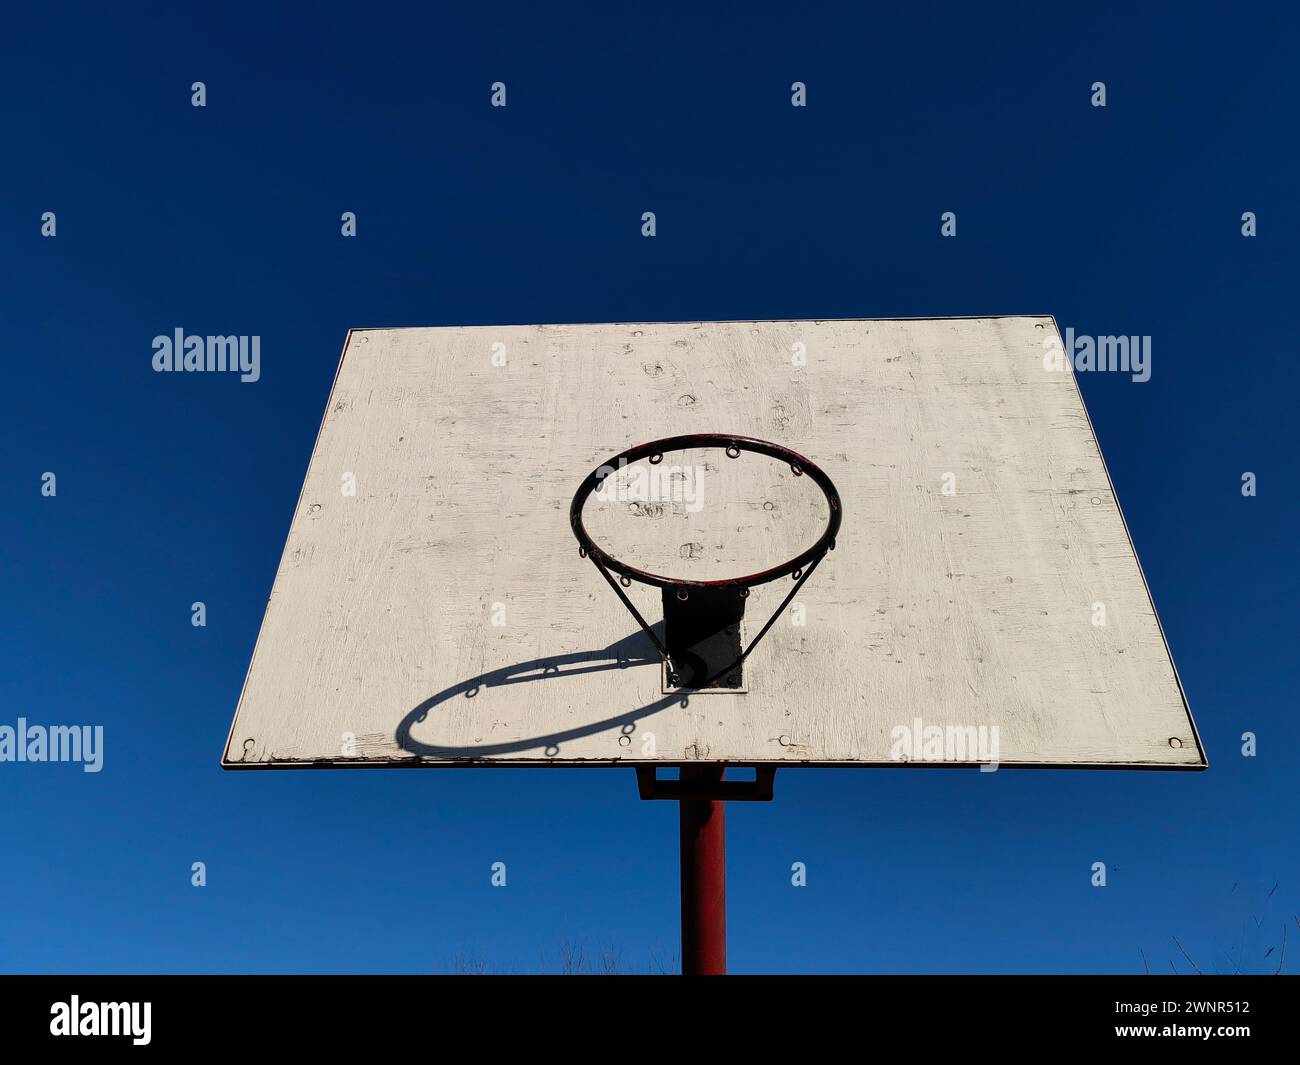 Sky bound swishes. Black rim and white board basketball time under blue sky. Stock Photo